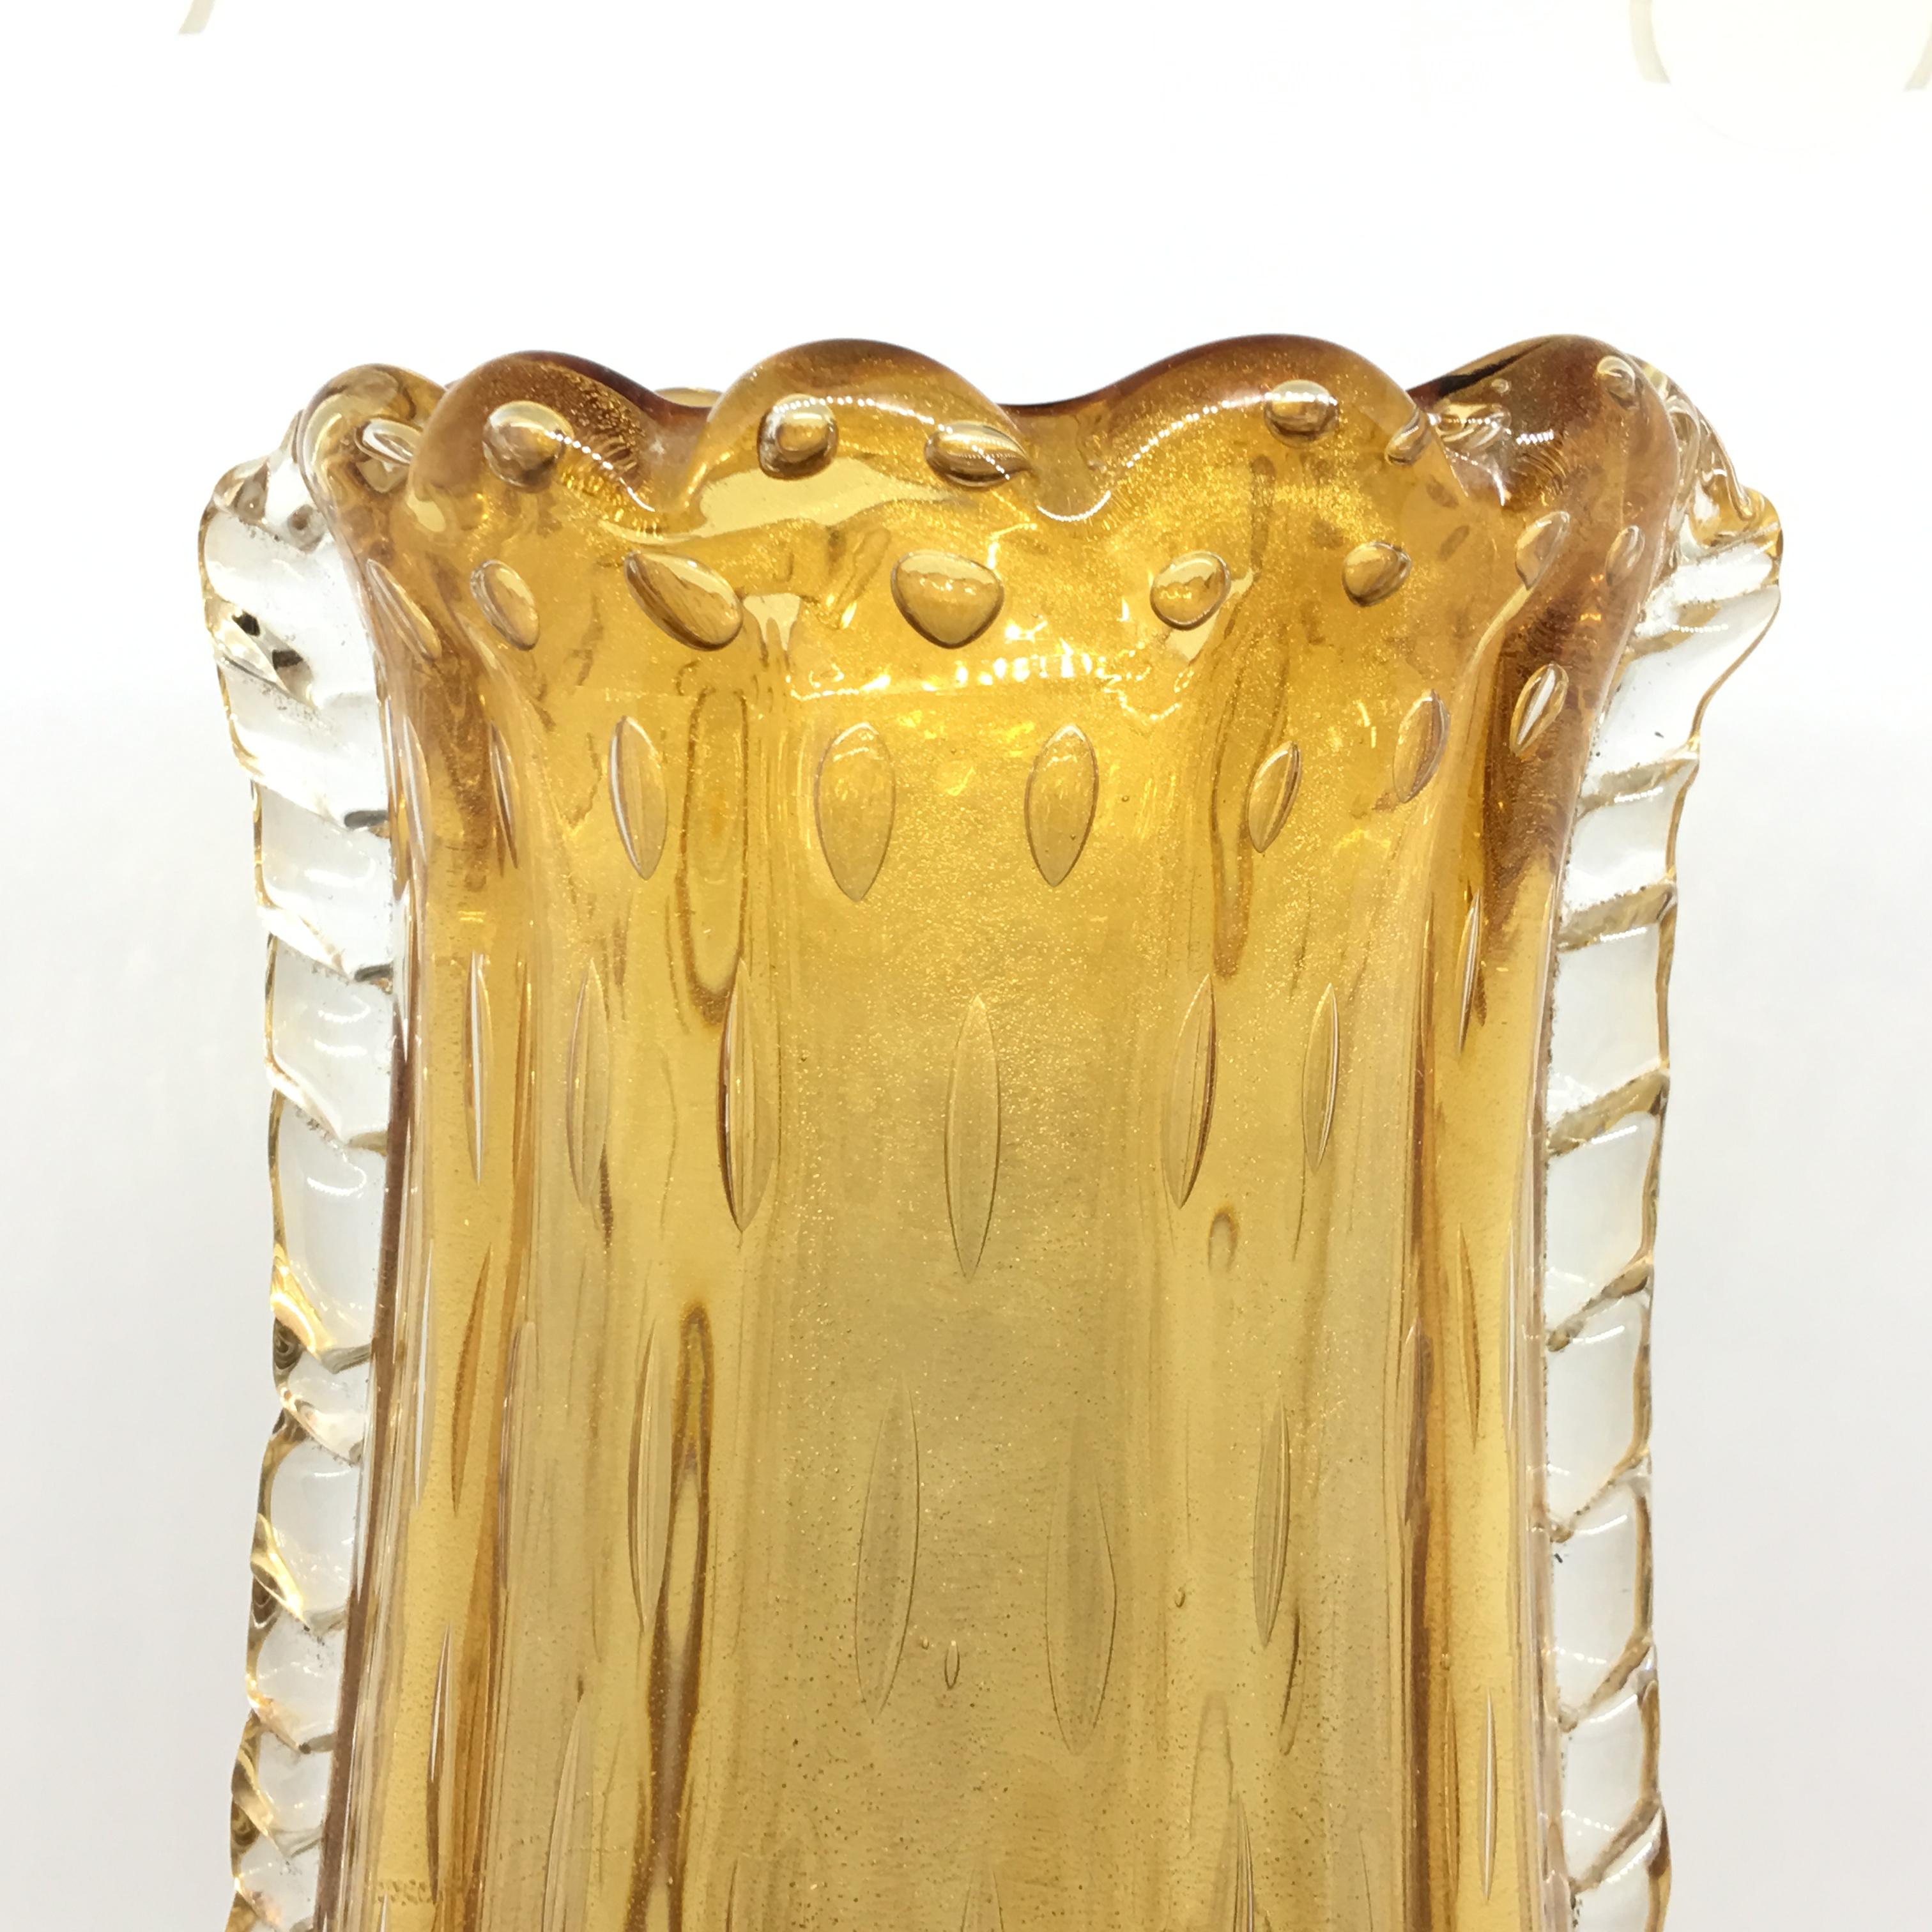 A yellow and gold Murano vase in the style of Barovier in perfect conditions.